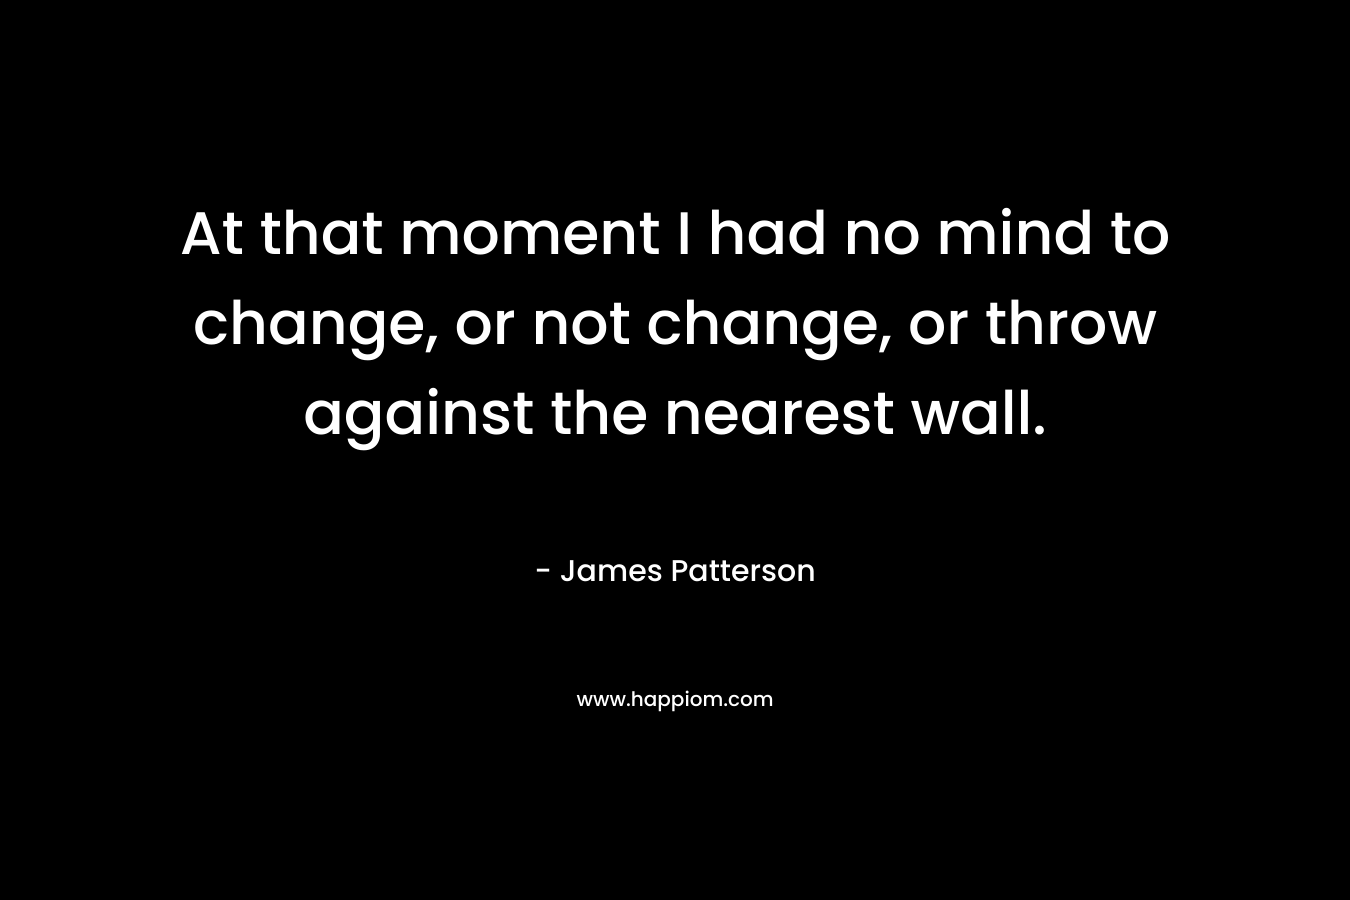 At that moment I had no mind to change, or not change, or throw against the nearest wall.